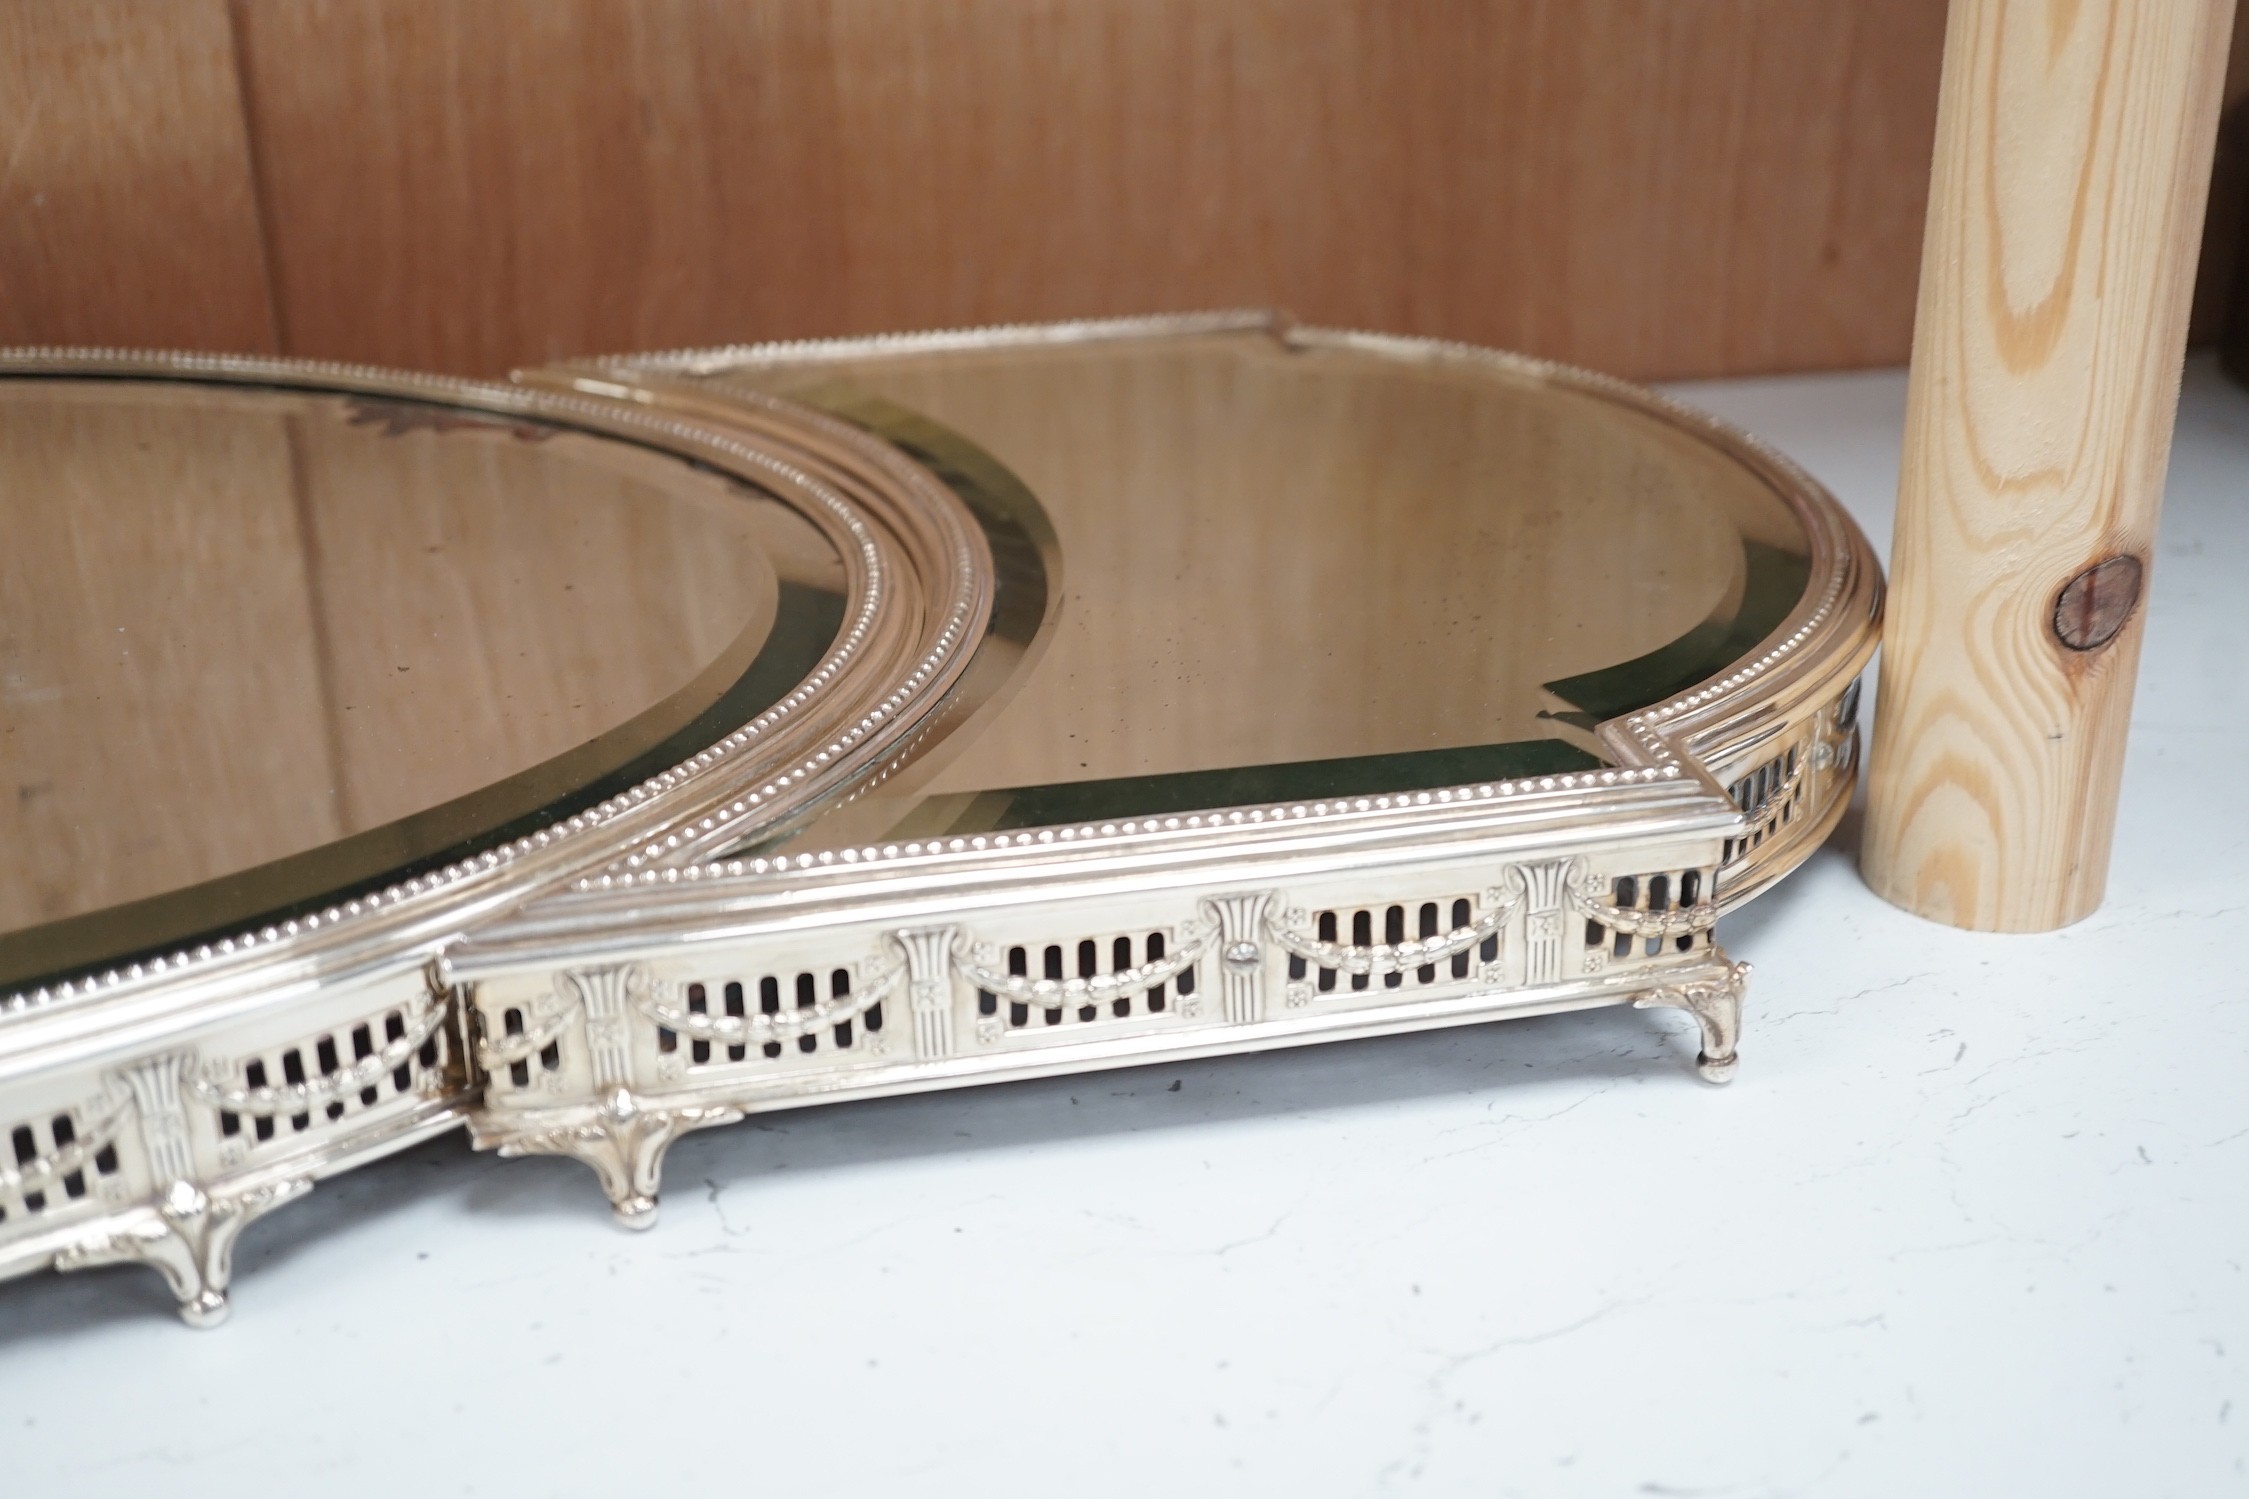 A silver-plated three-section mirrored plateau (surtout de table), by WMF, centre measures 53cm long